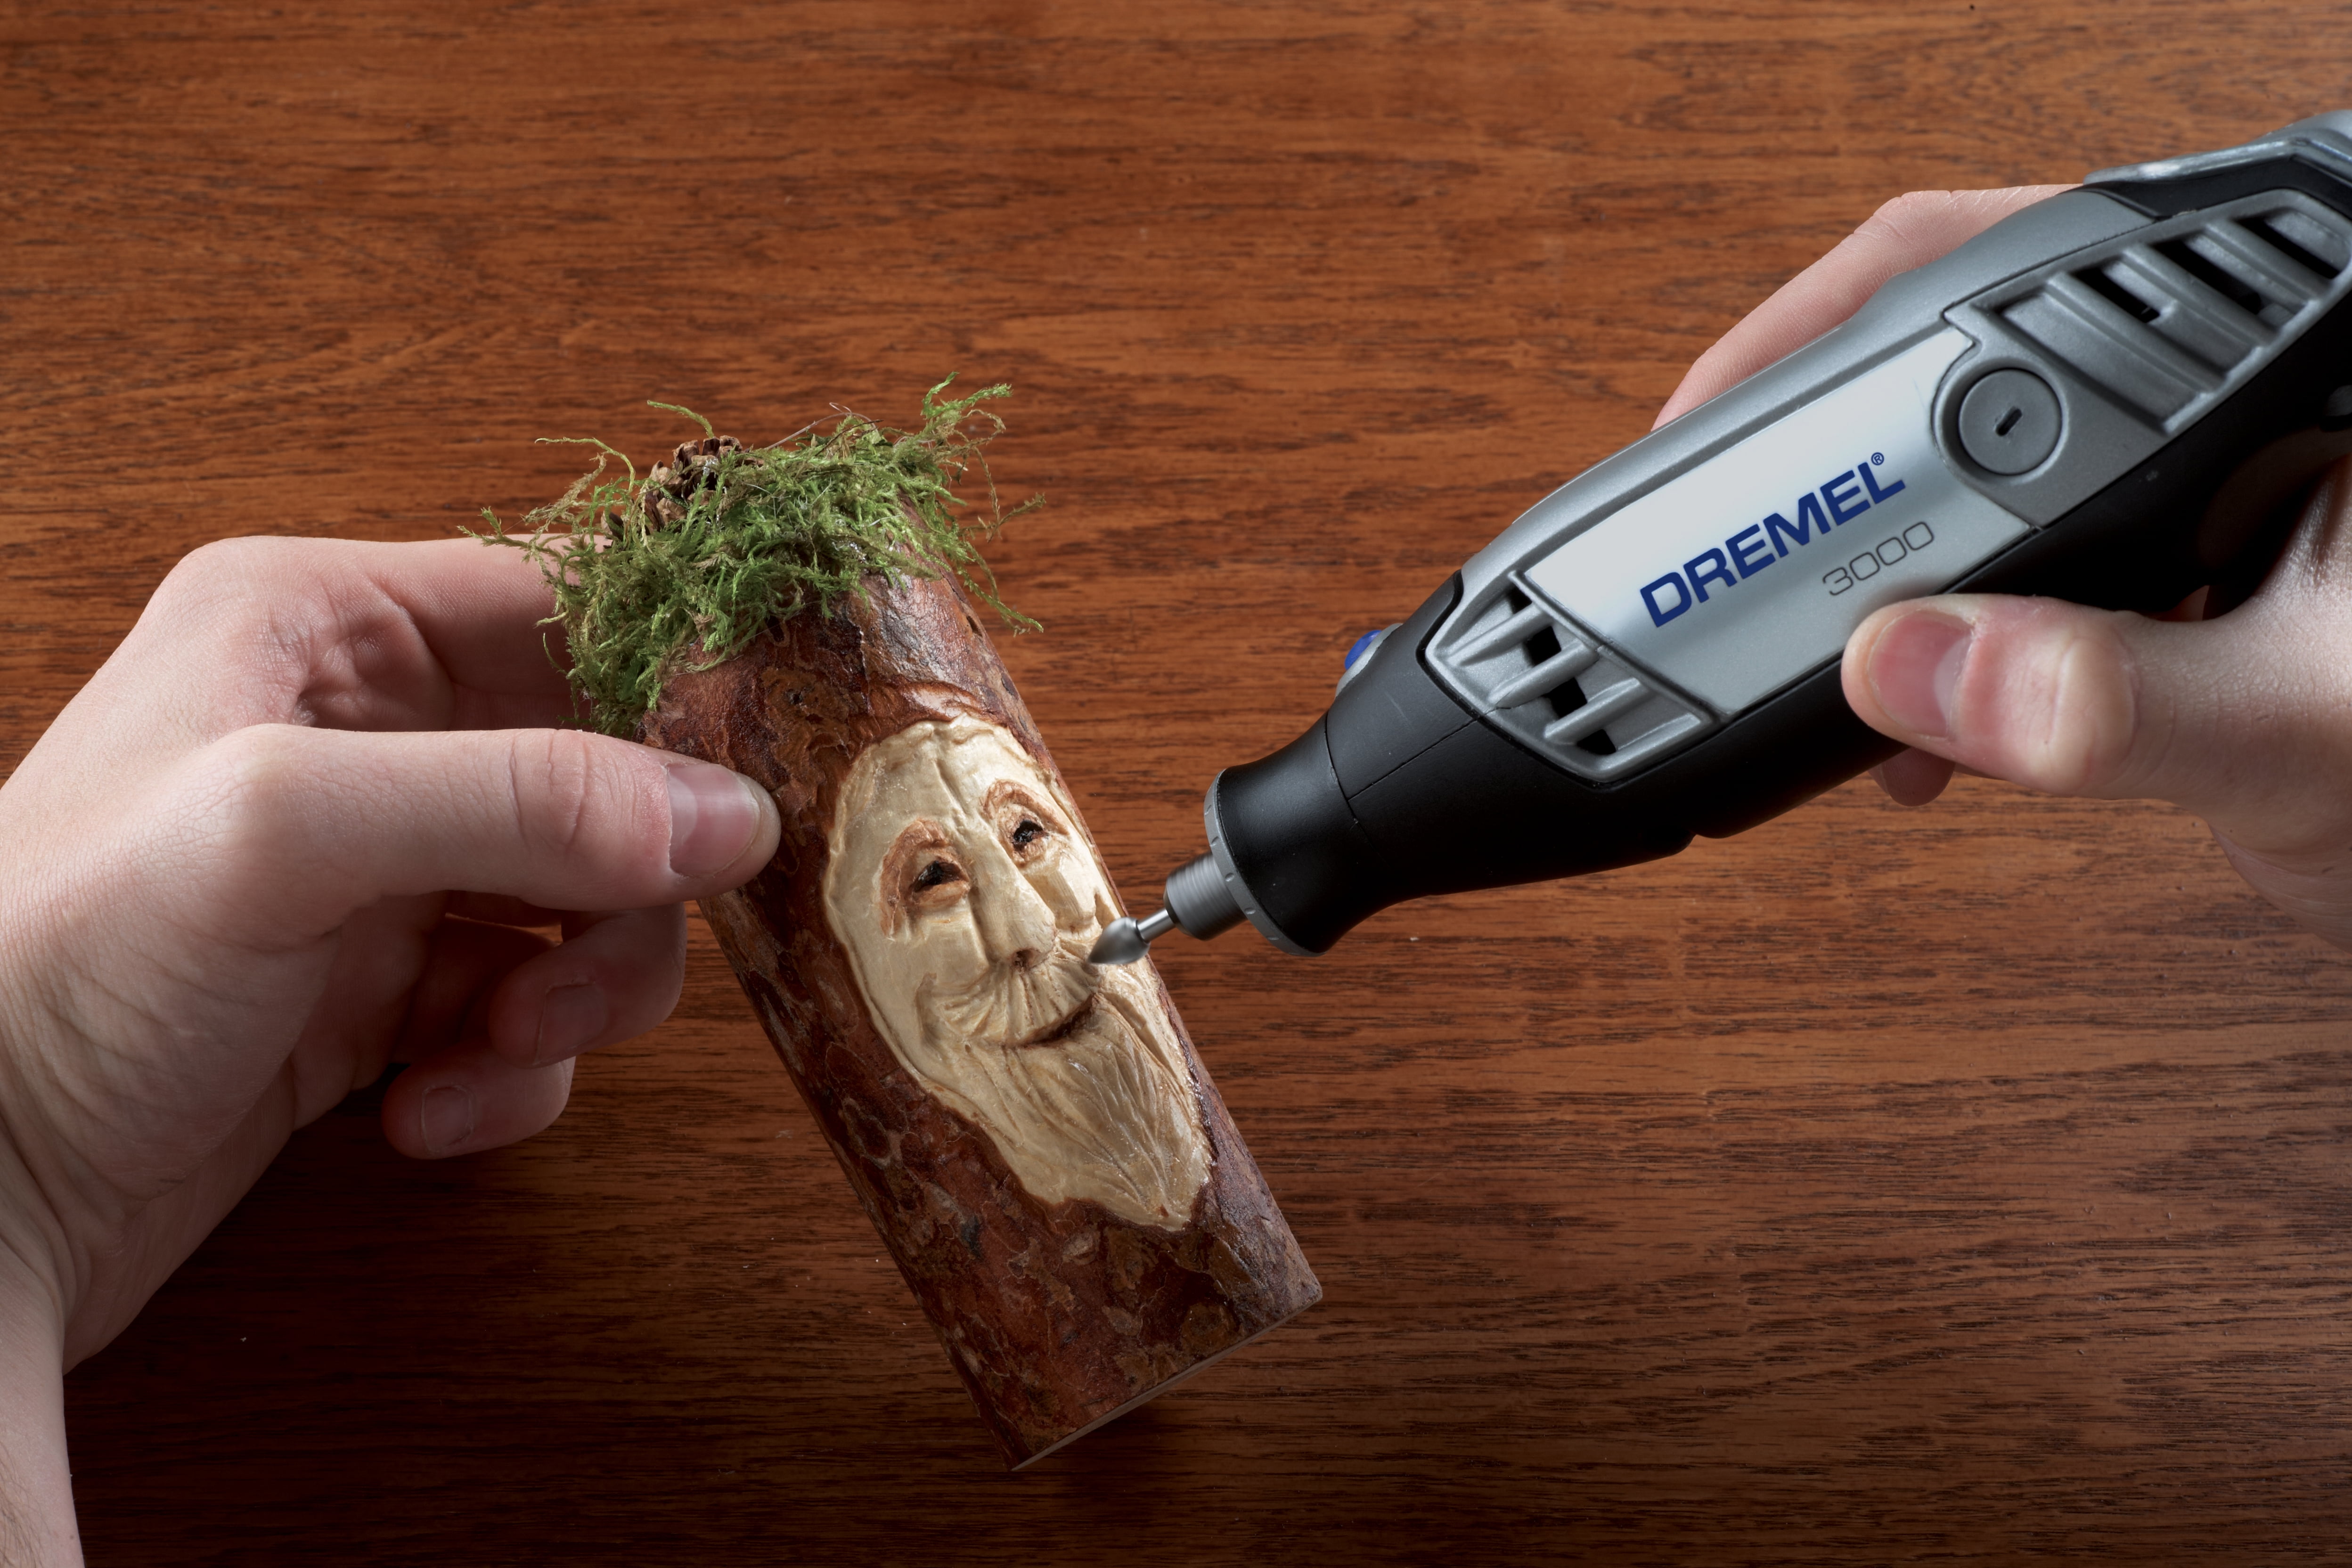 Need a Dremel? Today's Your Lucky Day